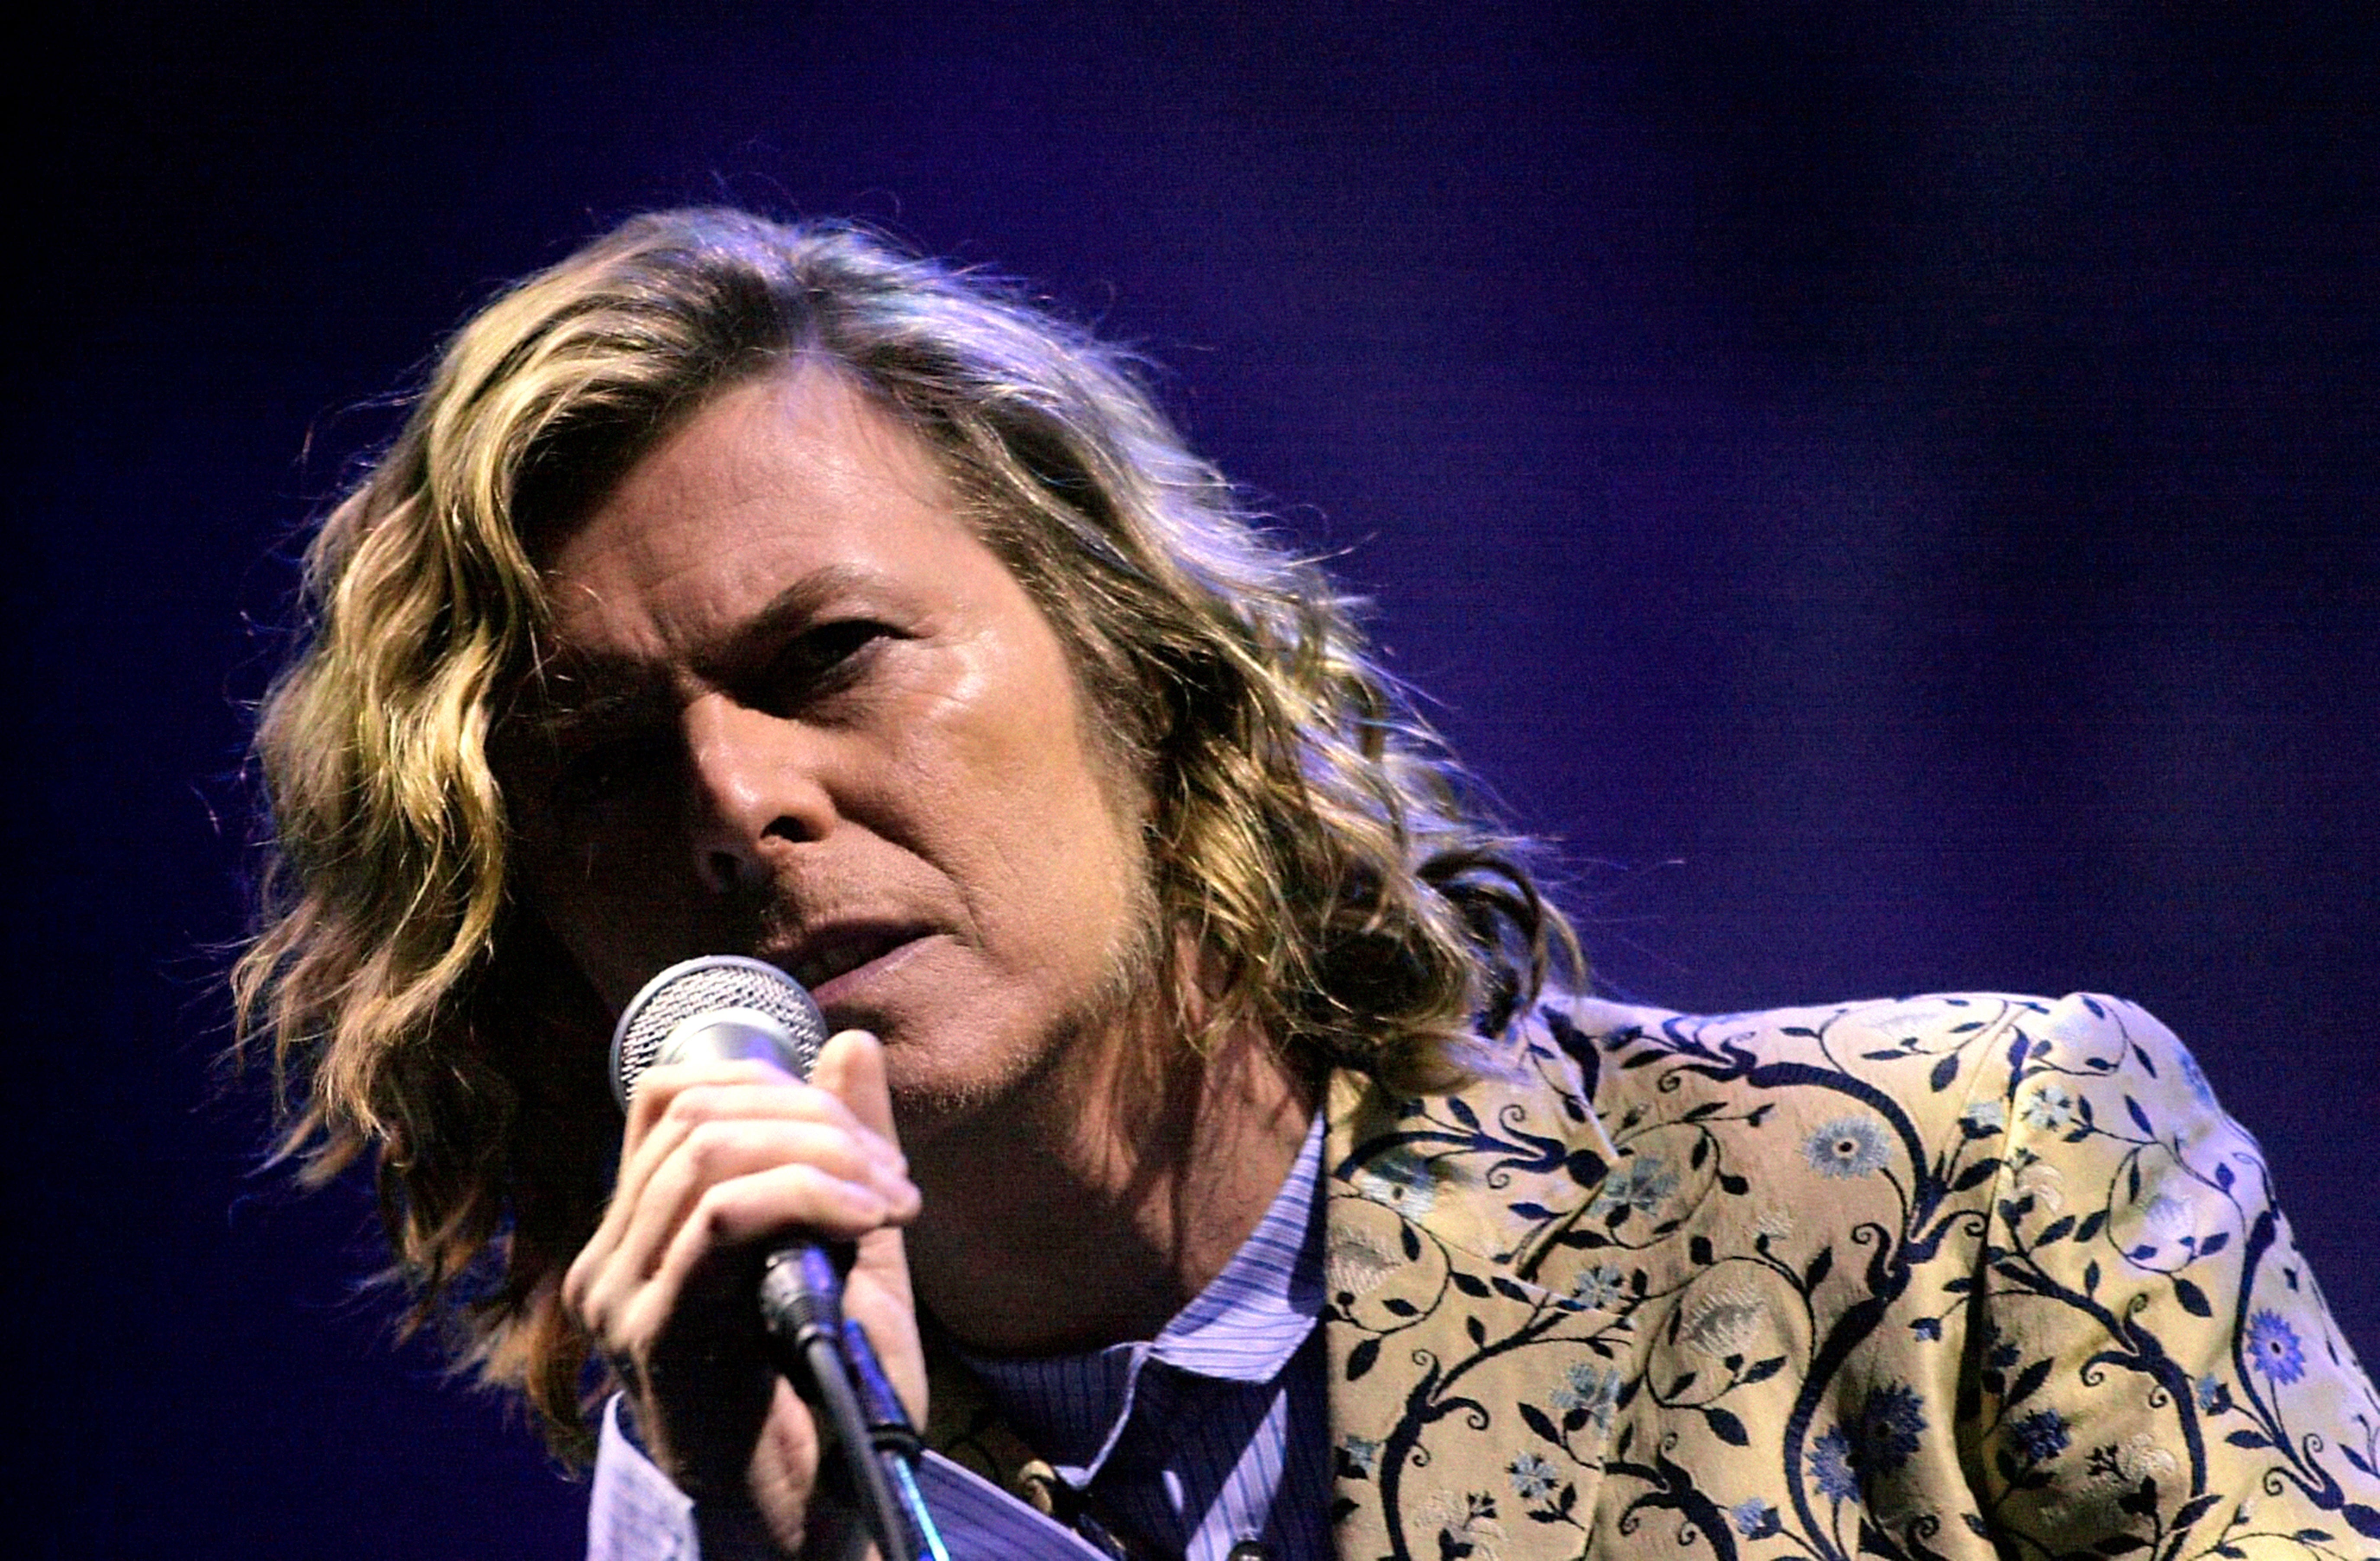 David Bowie performs in 2000